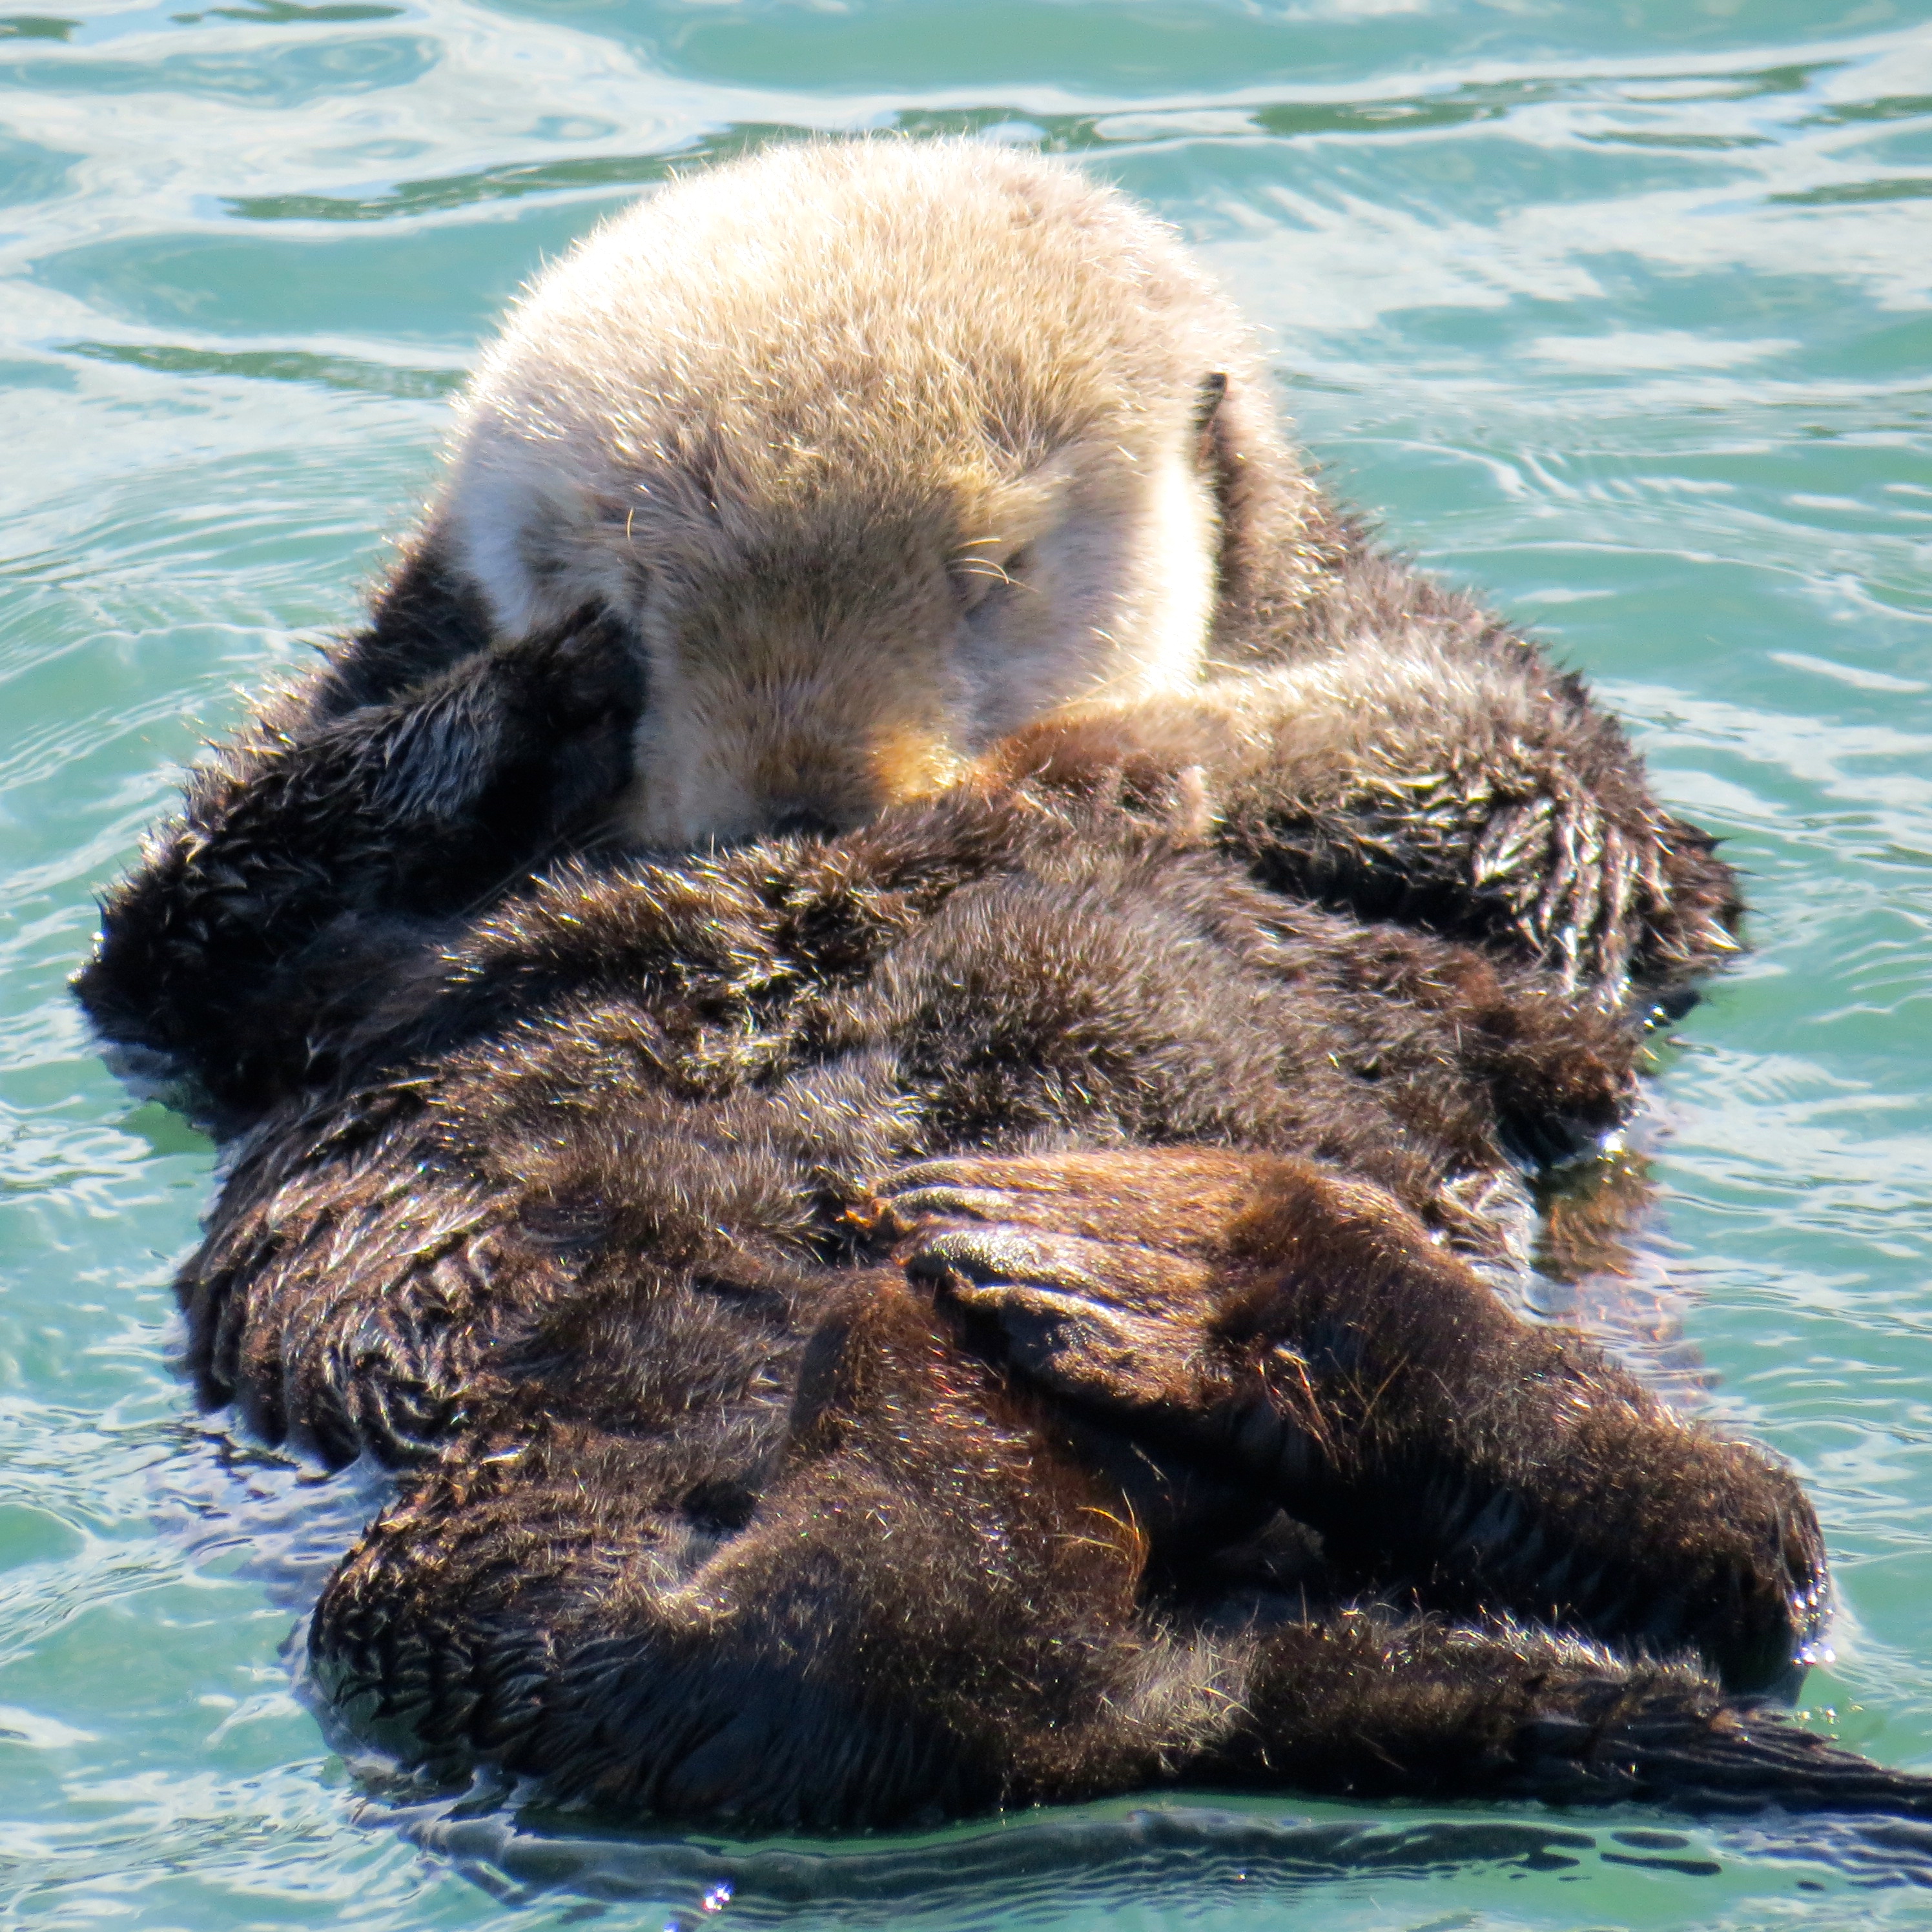 Mama Otter, loving her Pup.